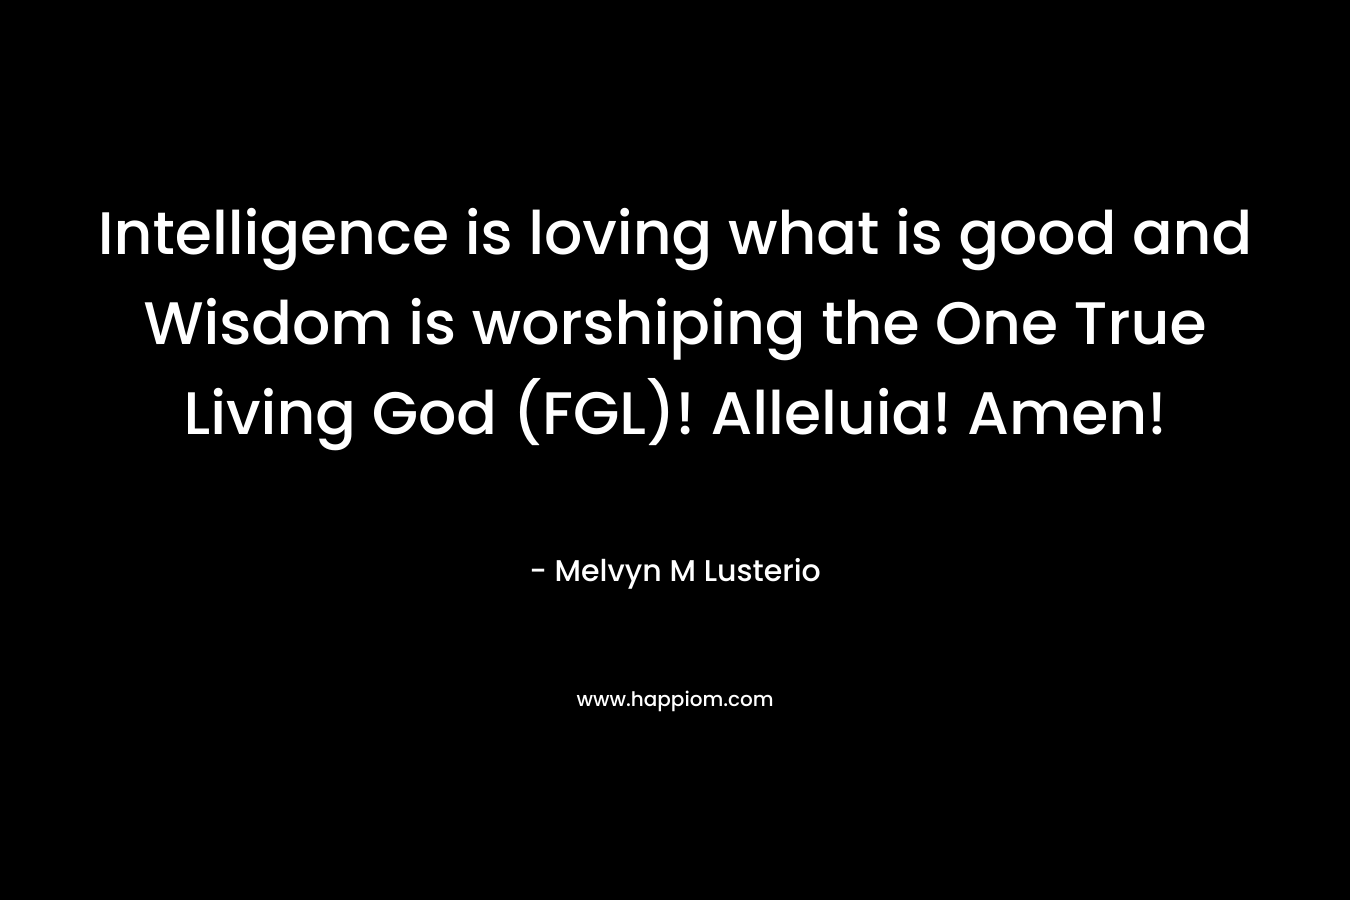 Intelligence is loving what is good and Wisdom is worshiping the One True Living God (FGL)! Alleluia! Amen! – Melvyn M Lusterio